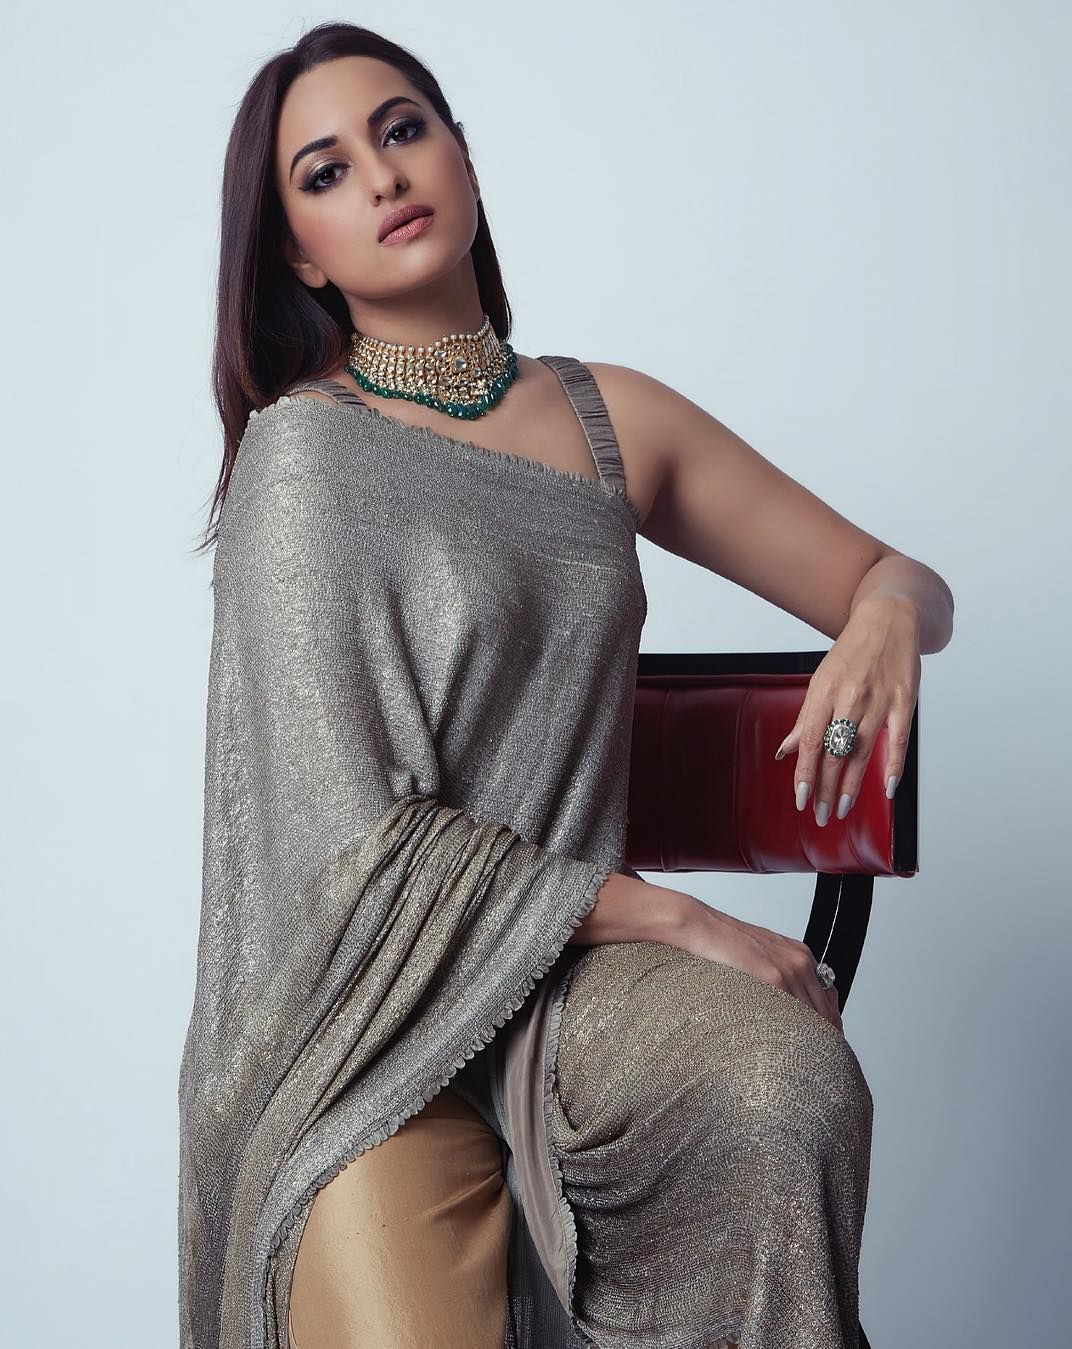 35 Hot And Sexy Sonakshi Sinha Pictures â€“ Dabangg Girl